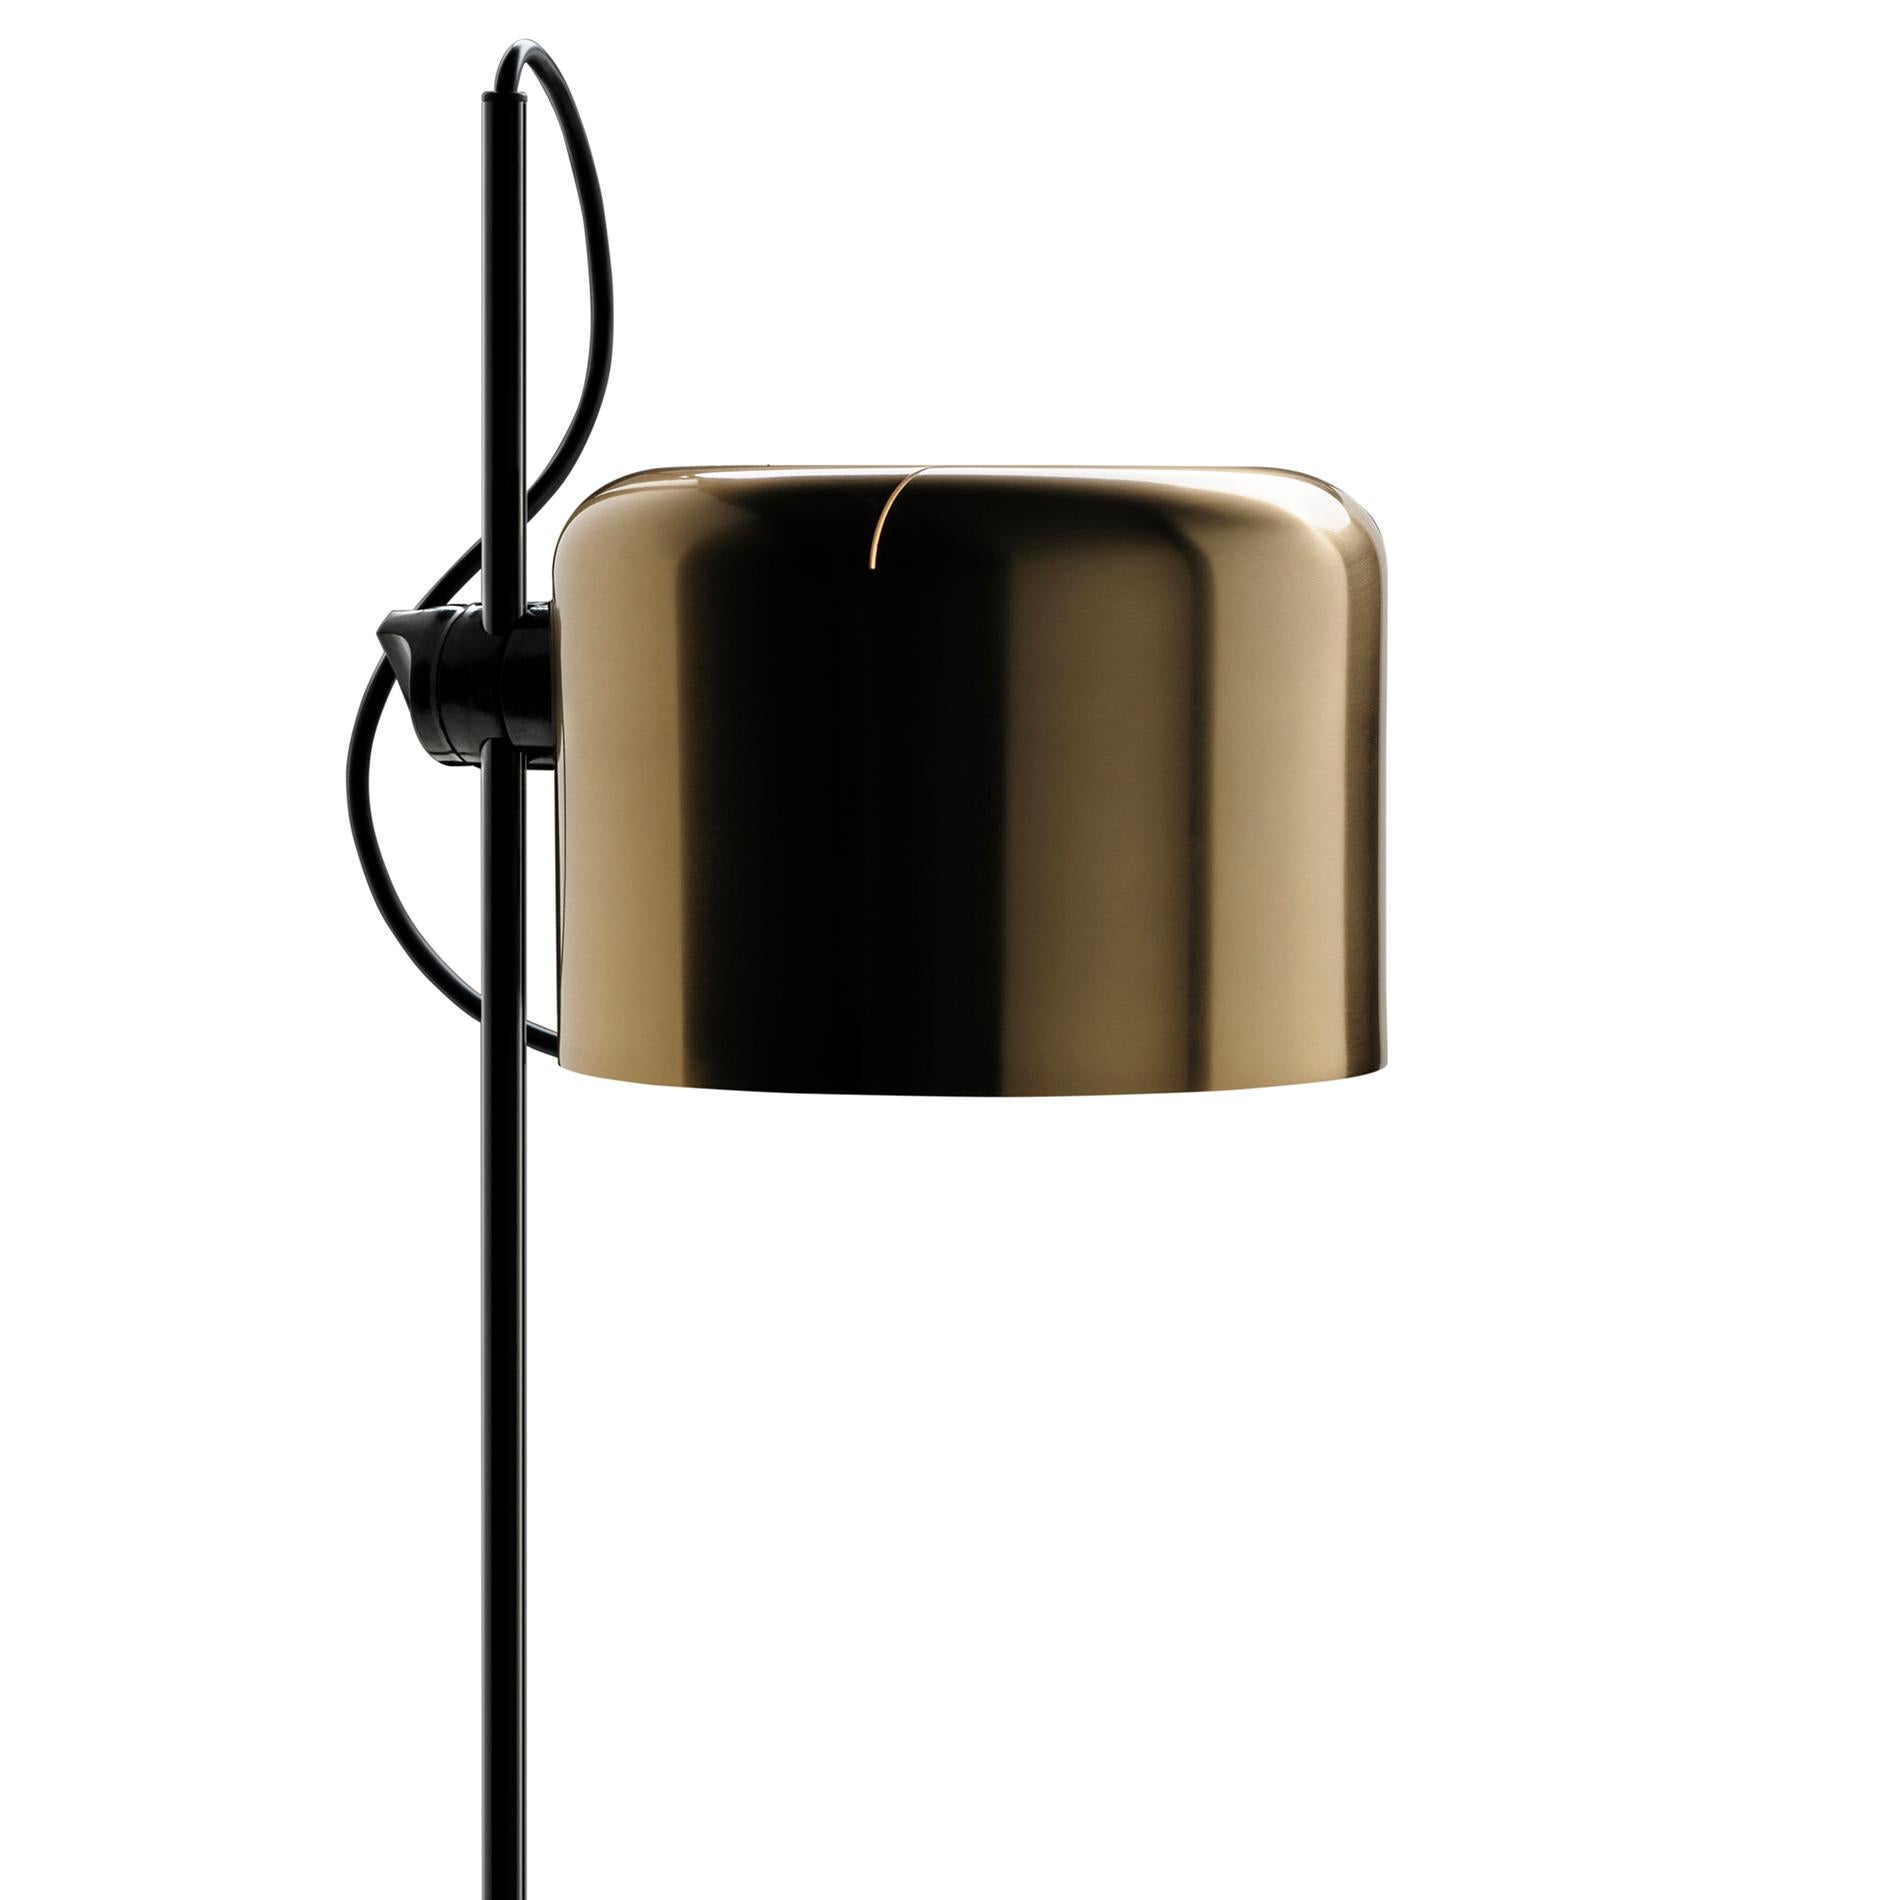 Floor lamp 'Coupé' designed by Joe Colombo in 1967.
Floor lamp giving direct light, lacquered metal base, chromium-plated stem, adjustable reflector in lacquered aluminium. Manufactured by Oluce, Italy.

It was 1967 when Joe Colombo designed Coupé,